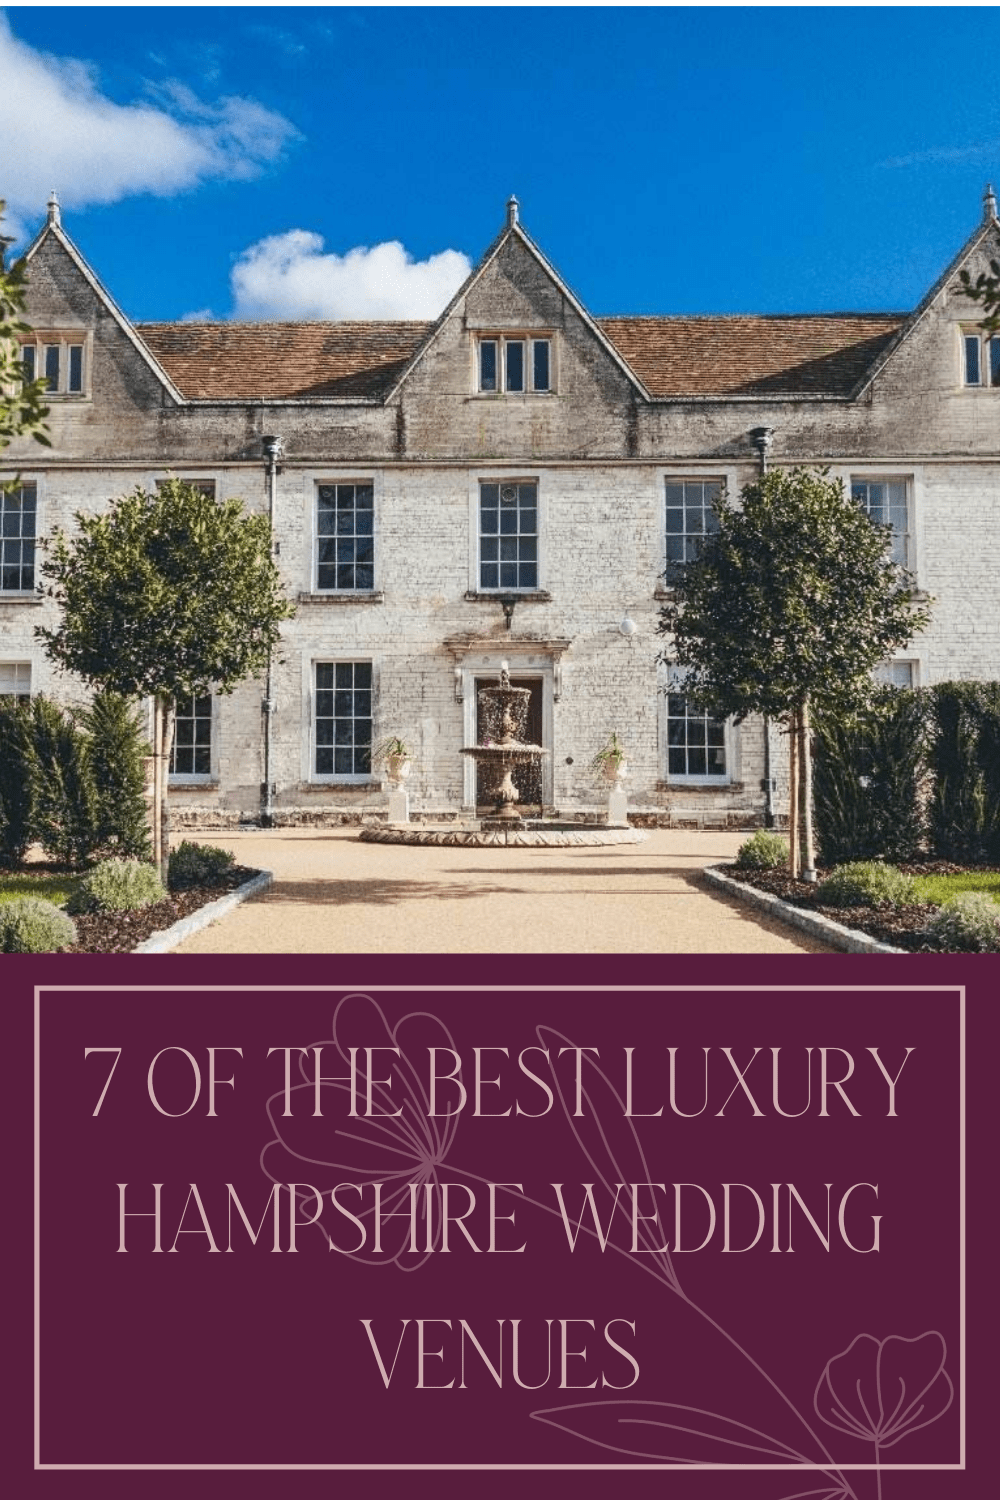 Wedding Venues Hampshire – 7 You Must See!